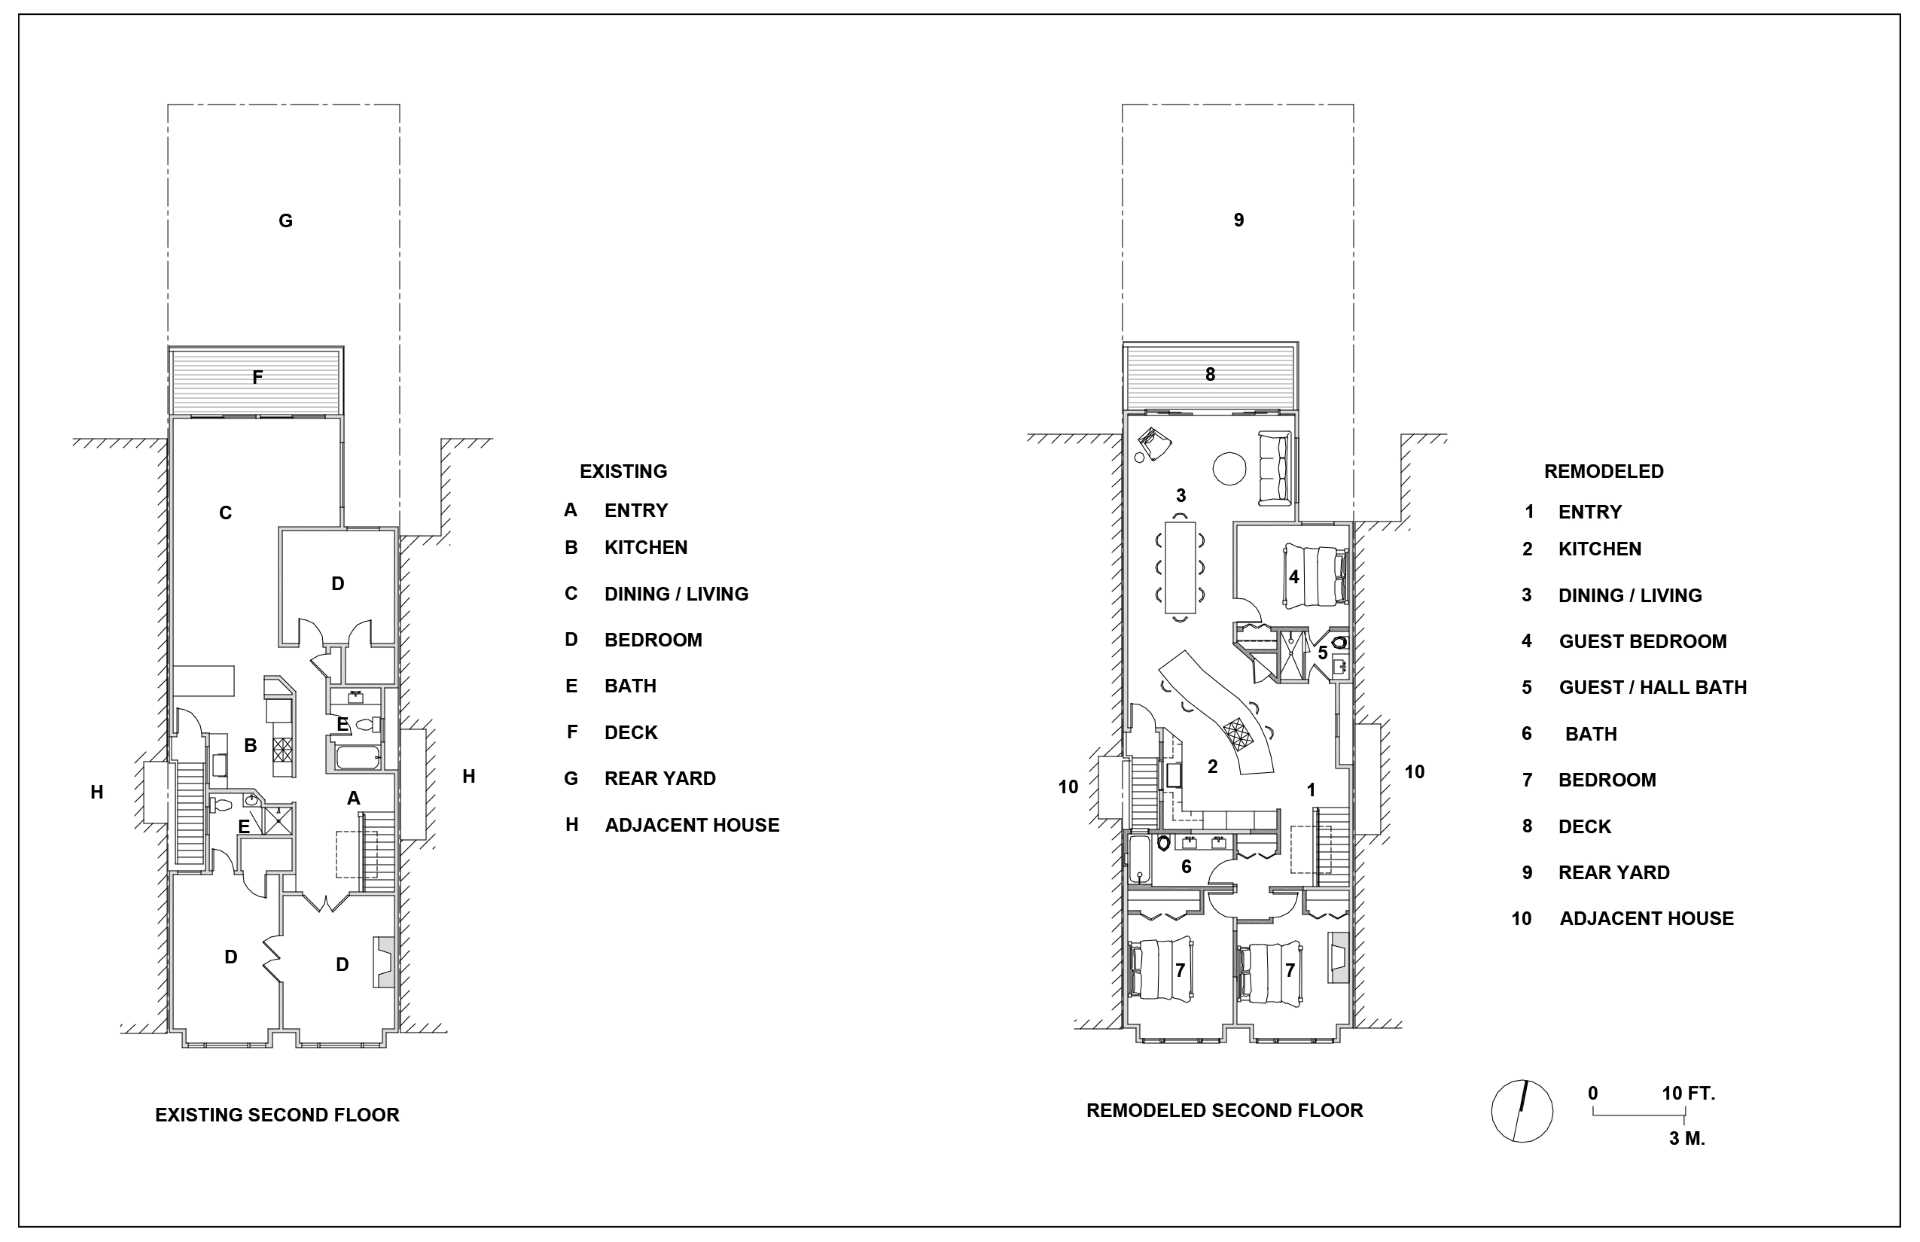 The floor plans of a remodeled home.